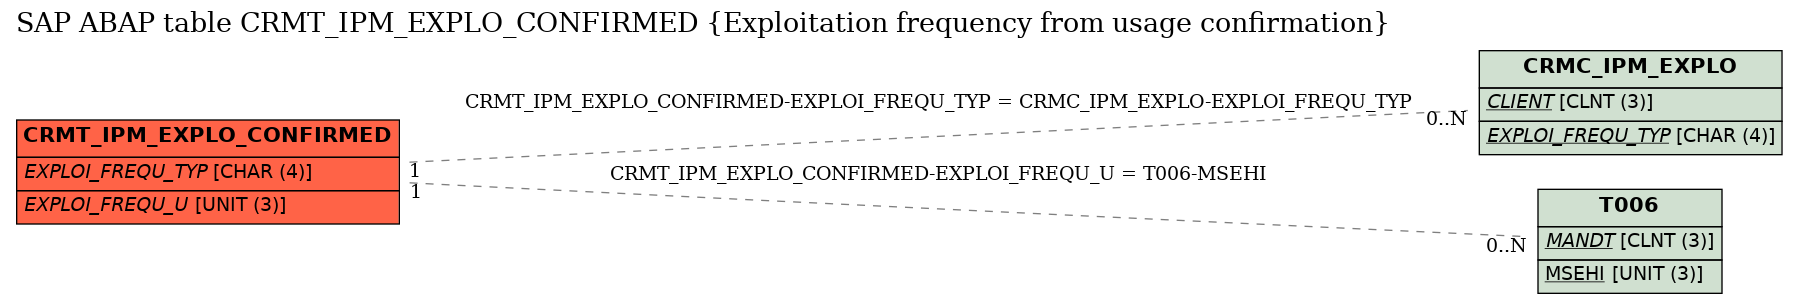 E-R Diagram for table CRMT_IPM_EXPLO_CONFIRMED (Exploitation frequency from usage confirmation)